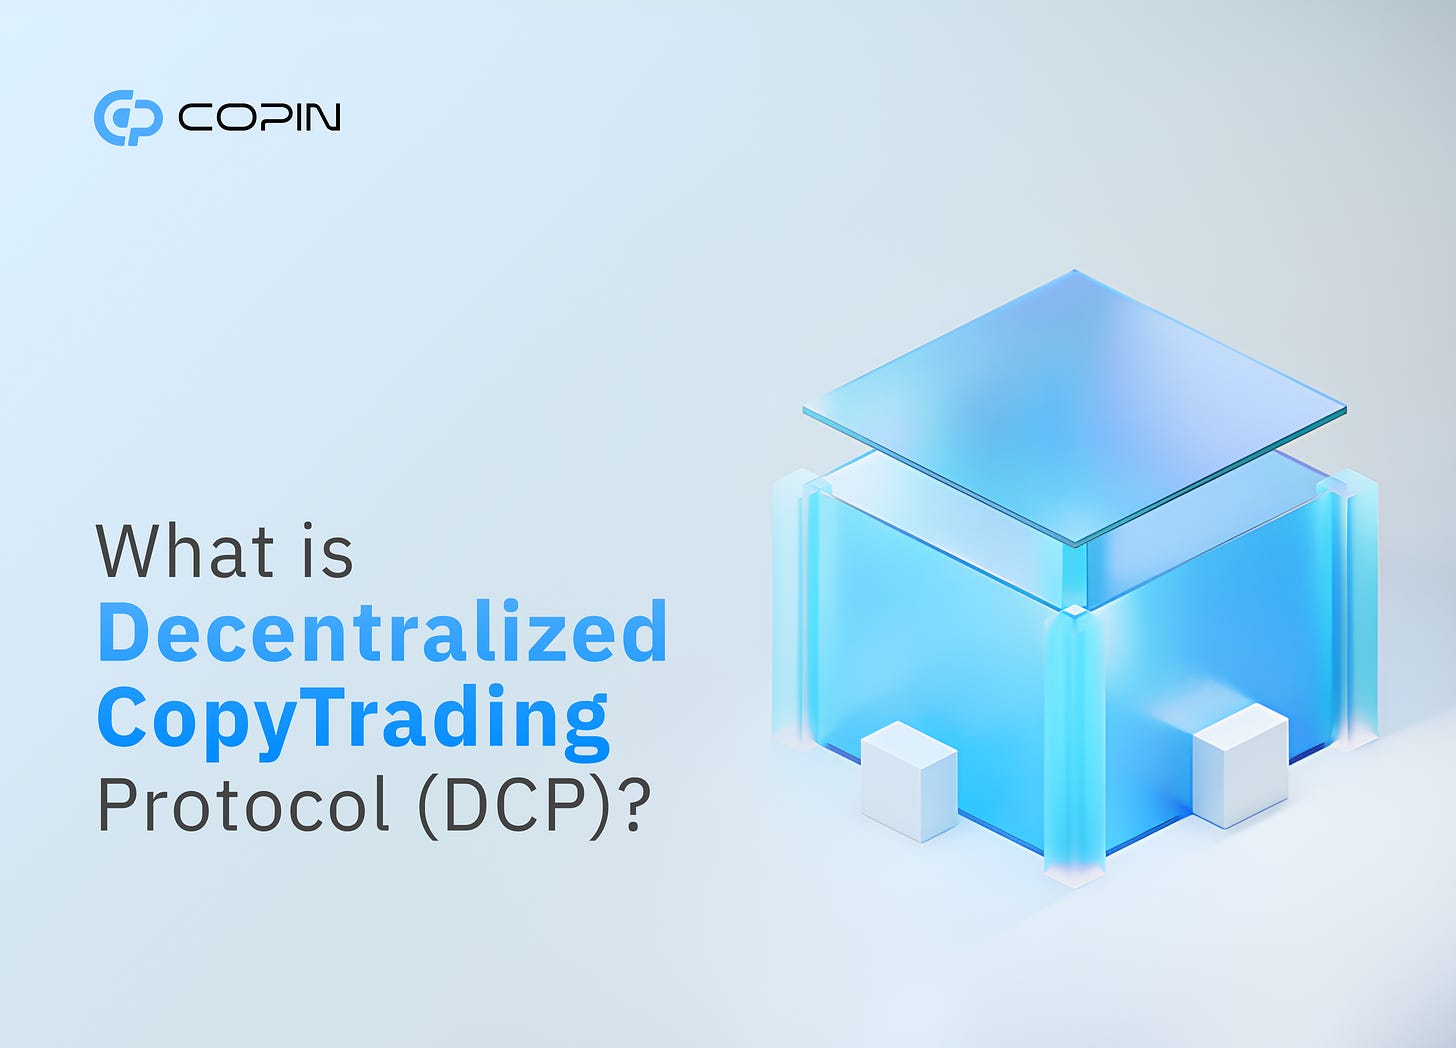 What is Decentralized CopyTrading Protocol (DCP)? 